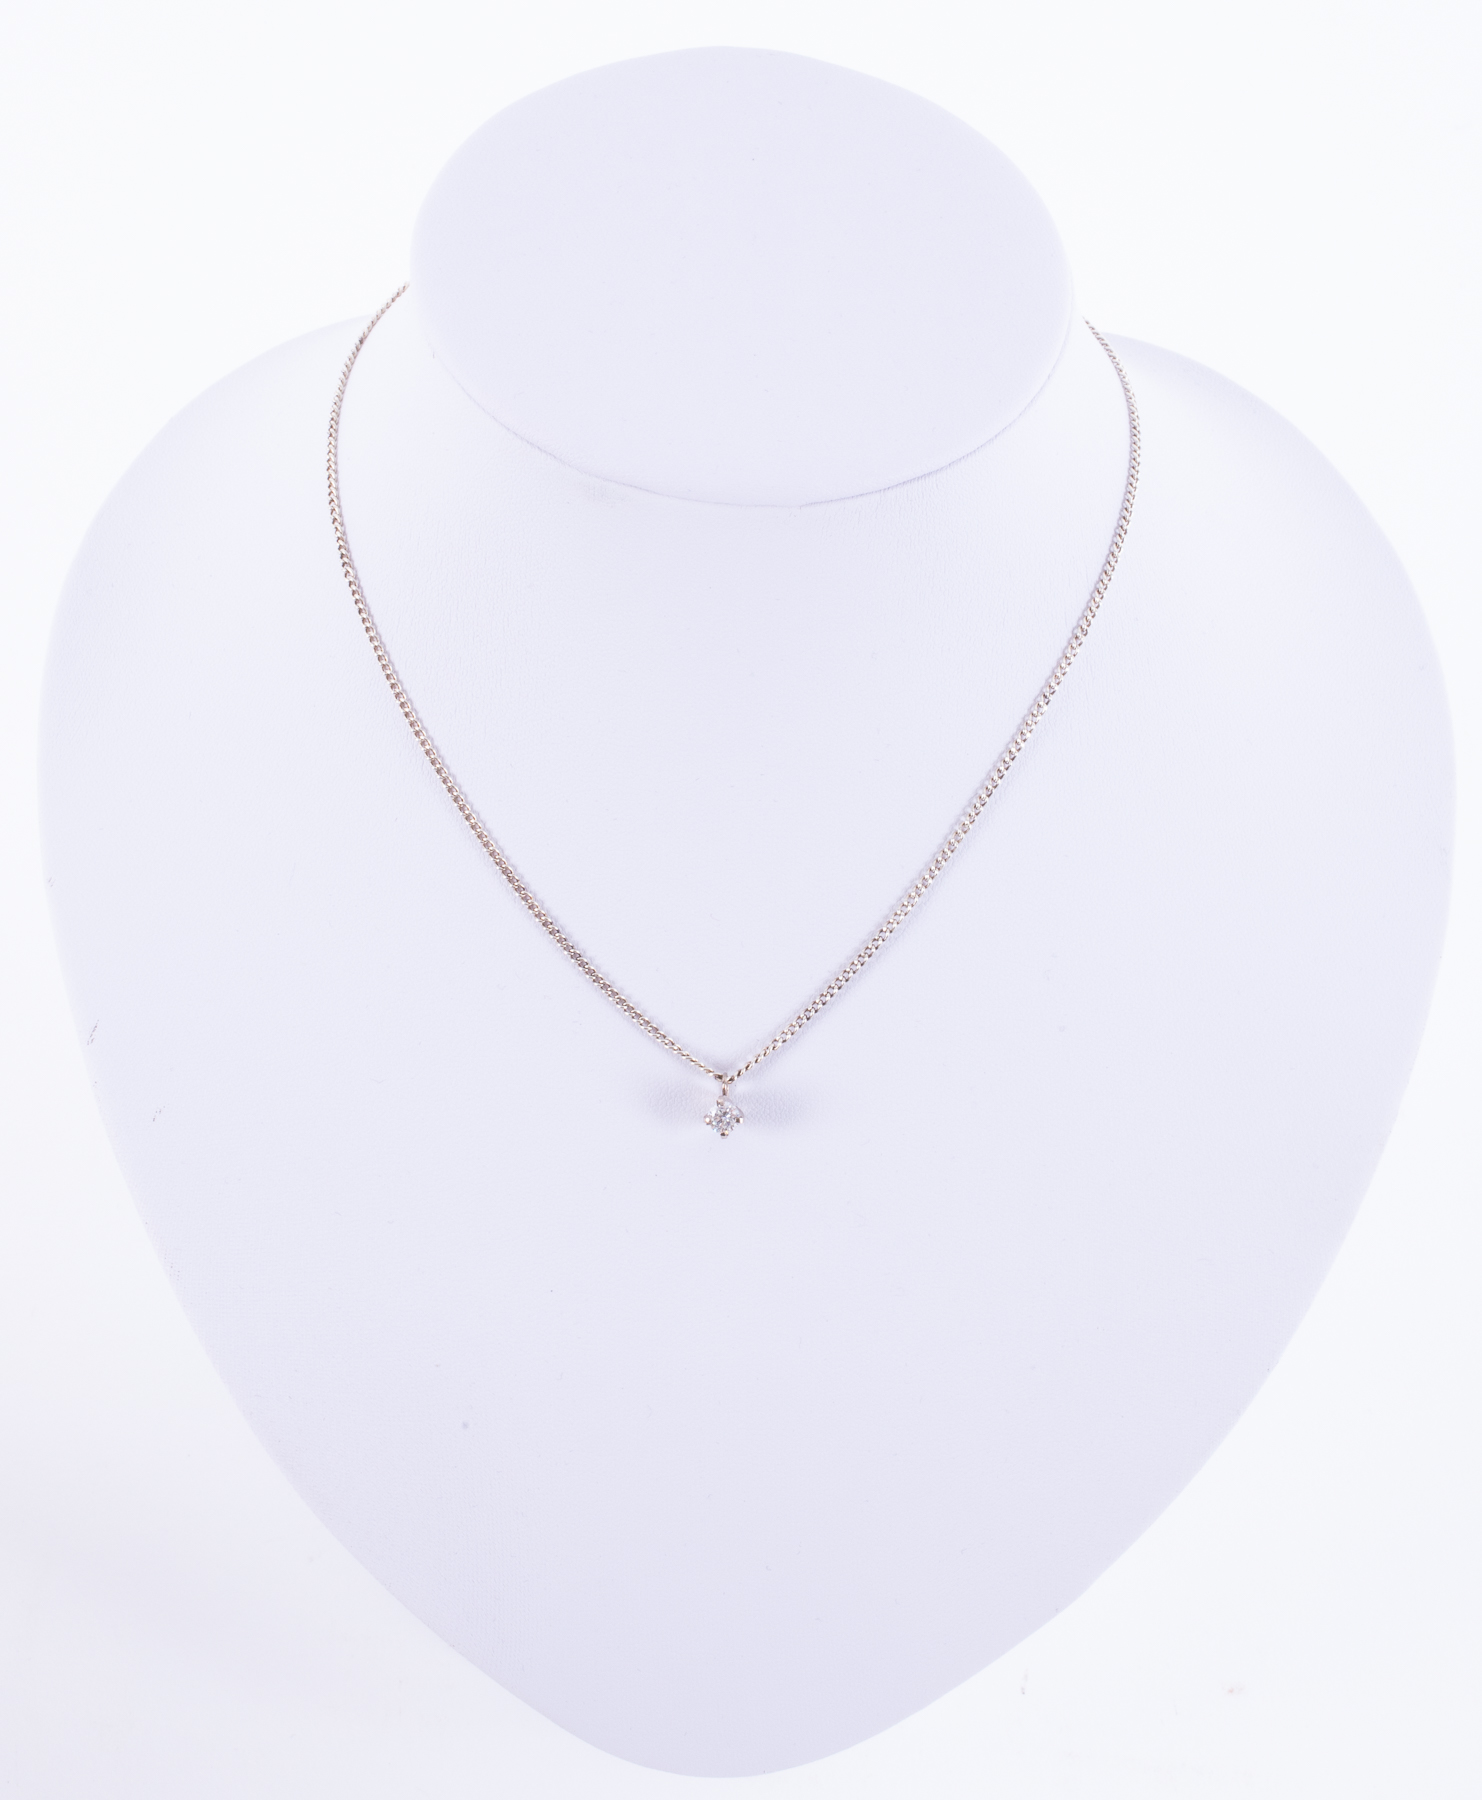 An 18ct white gold handmade pendant (not hallmarked or tested) set with a round brilliant